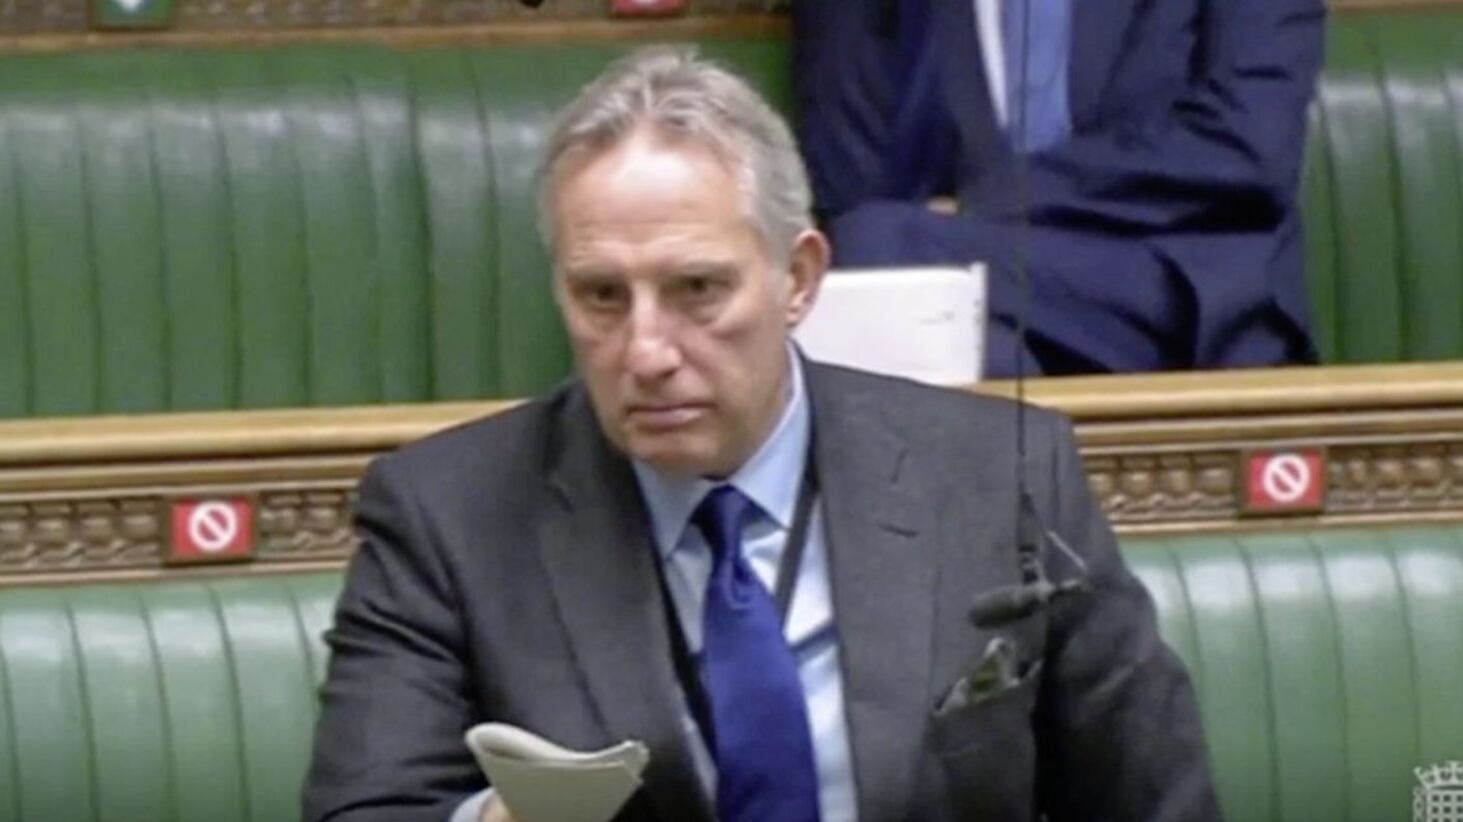 DUP MP Ian Paisley seems to have few qualms about undermining his party leadership 